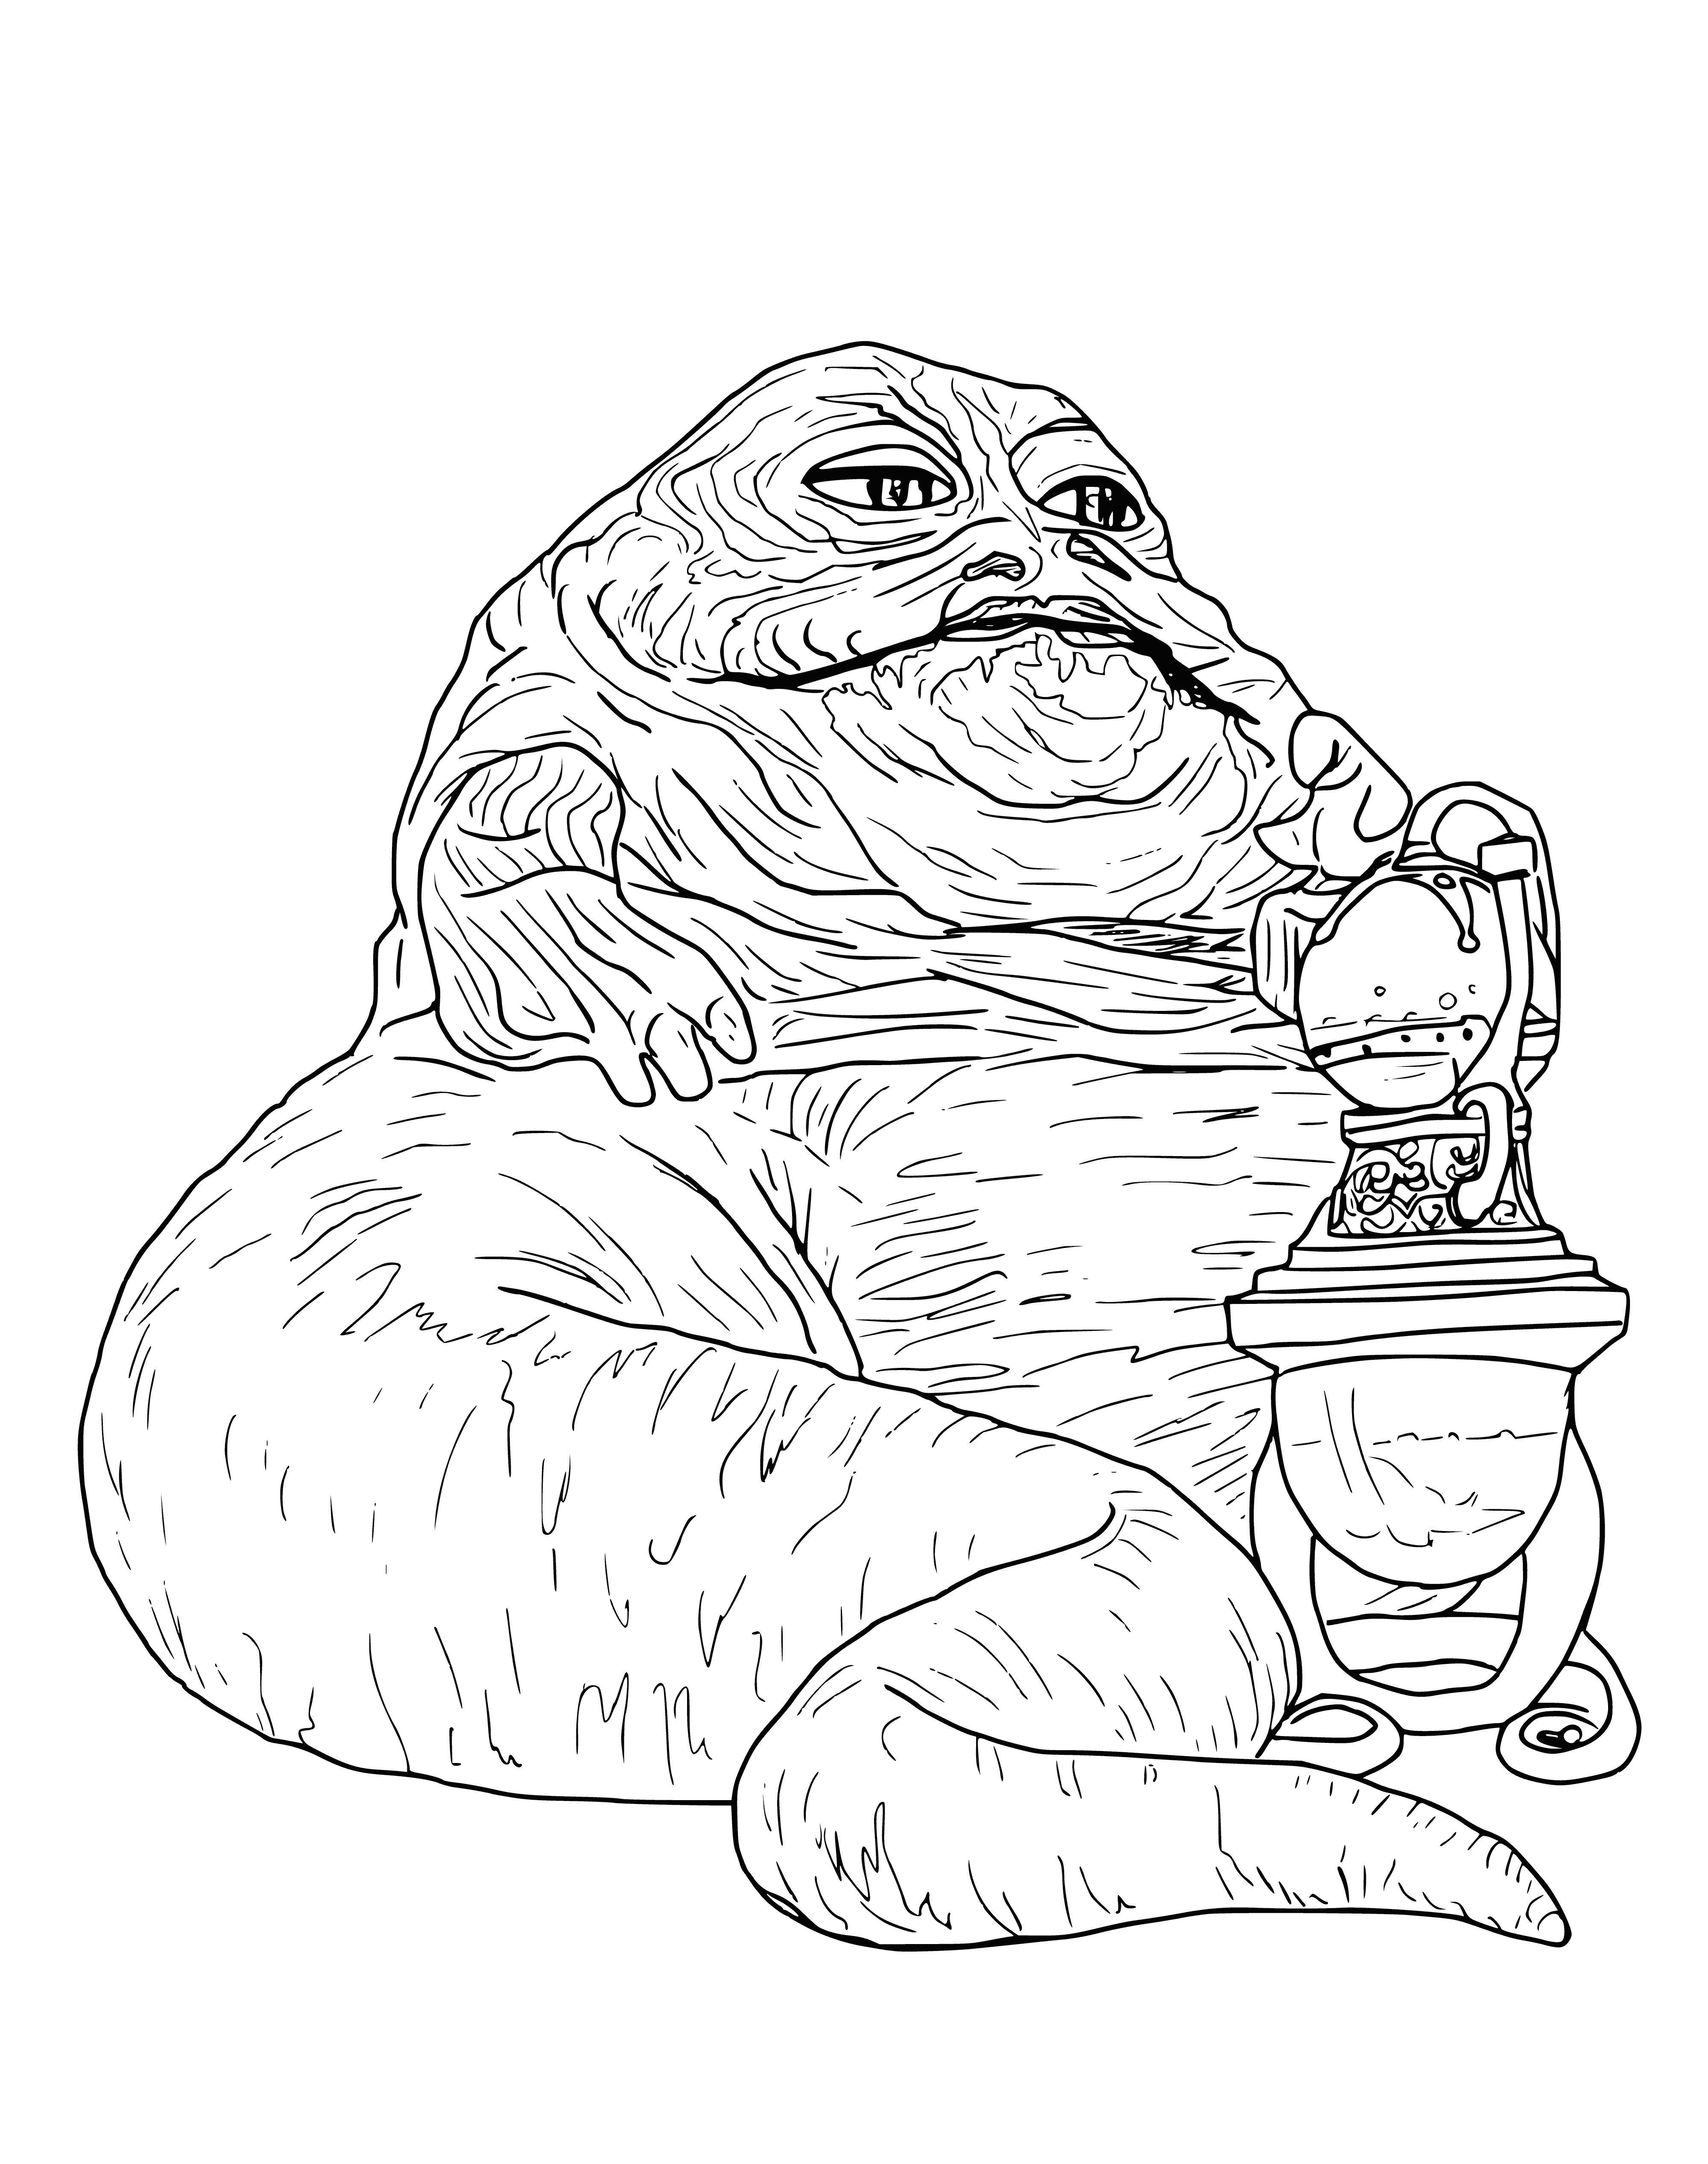 coloring page: Jabba the Hutt is the fearsome leader of smugglers on Tatooine - huge, slug-like creature with beaked mouth, small eyes, bald head & gold necklace.